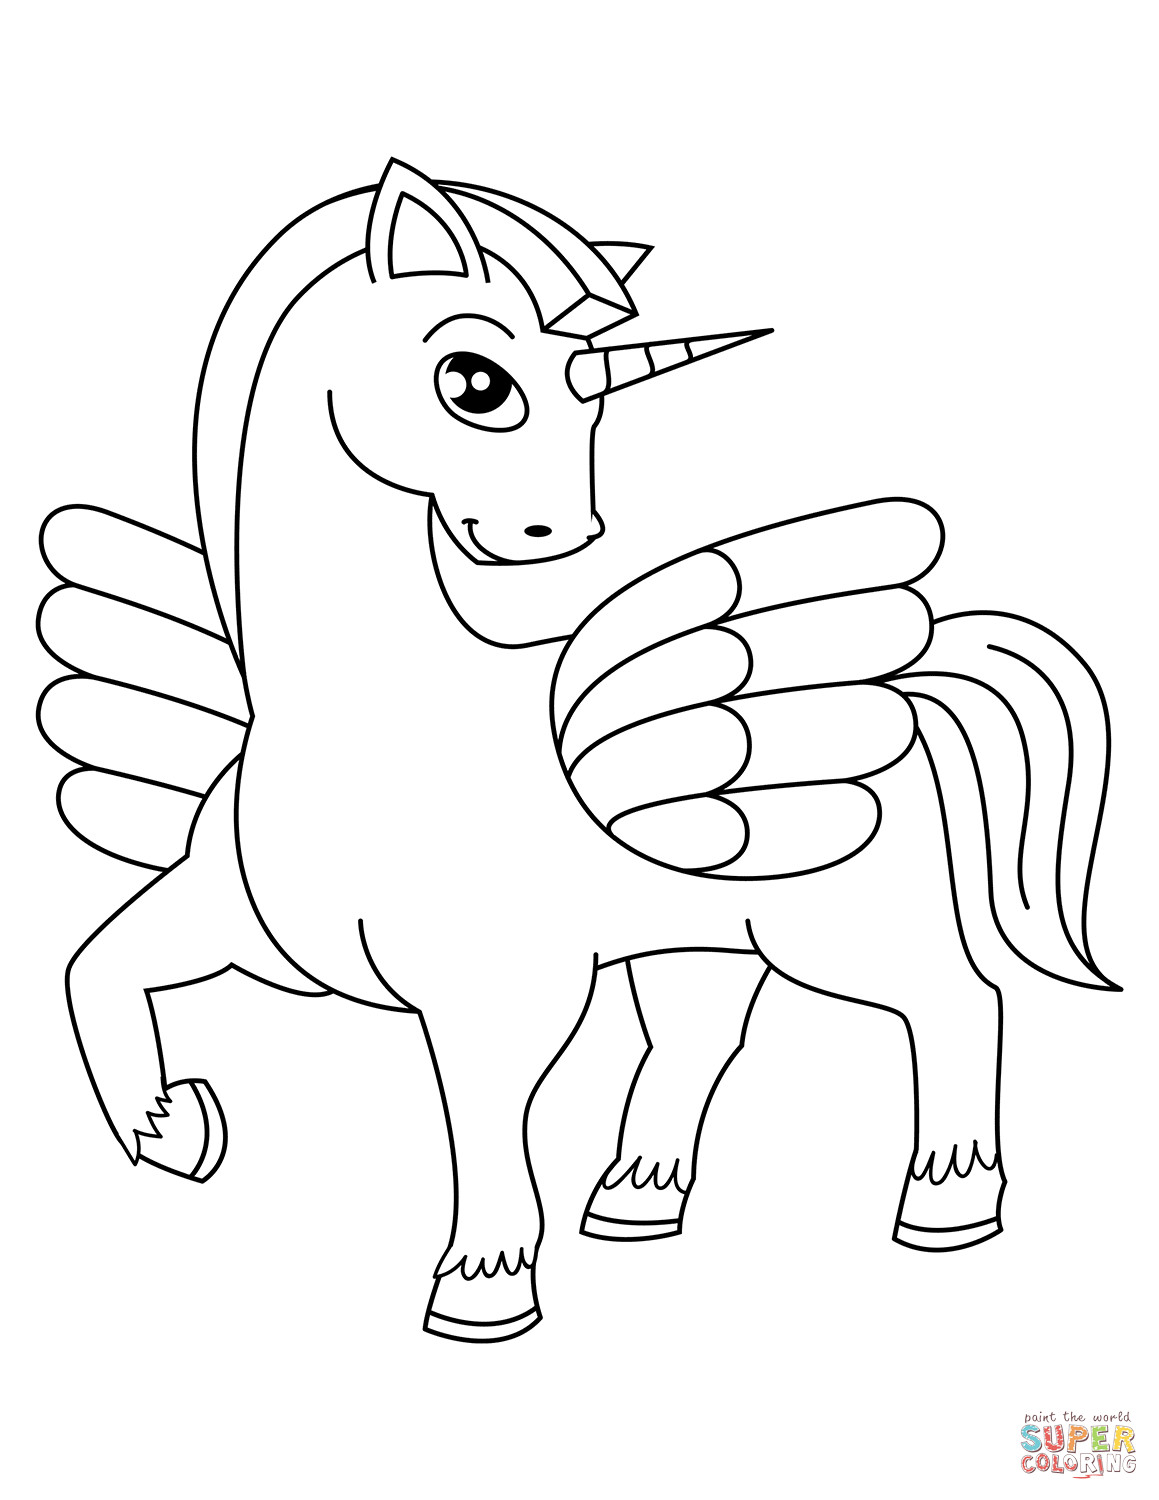 Unicorn Coloring Pages Printable
 Cute Winged Unicorn coloring page